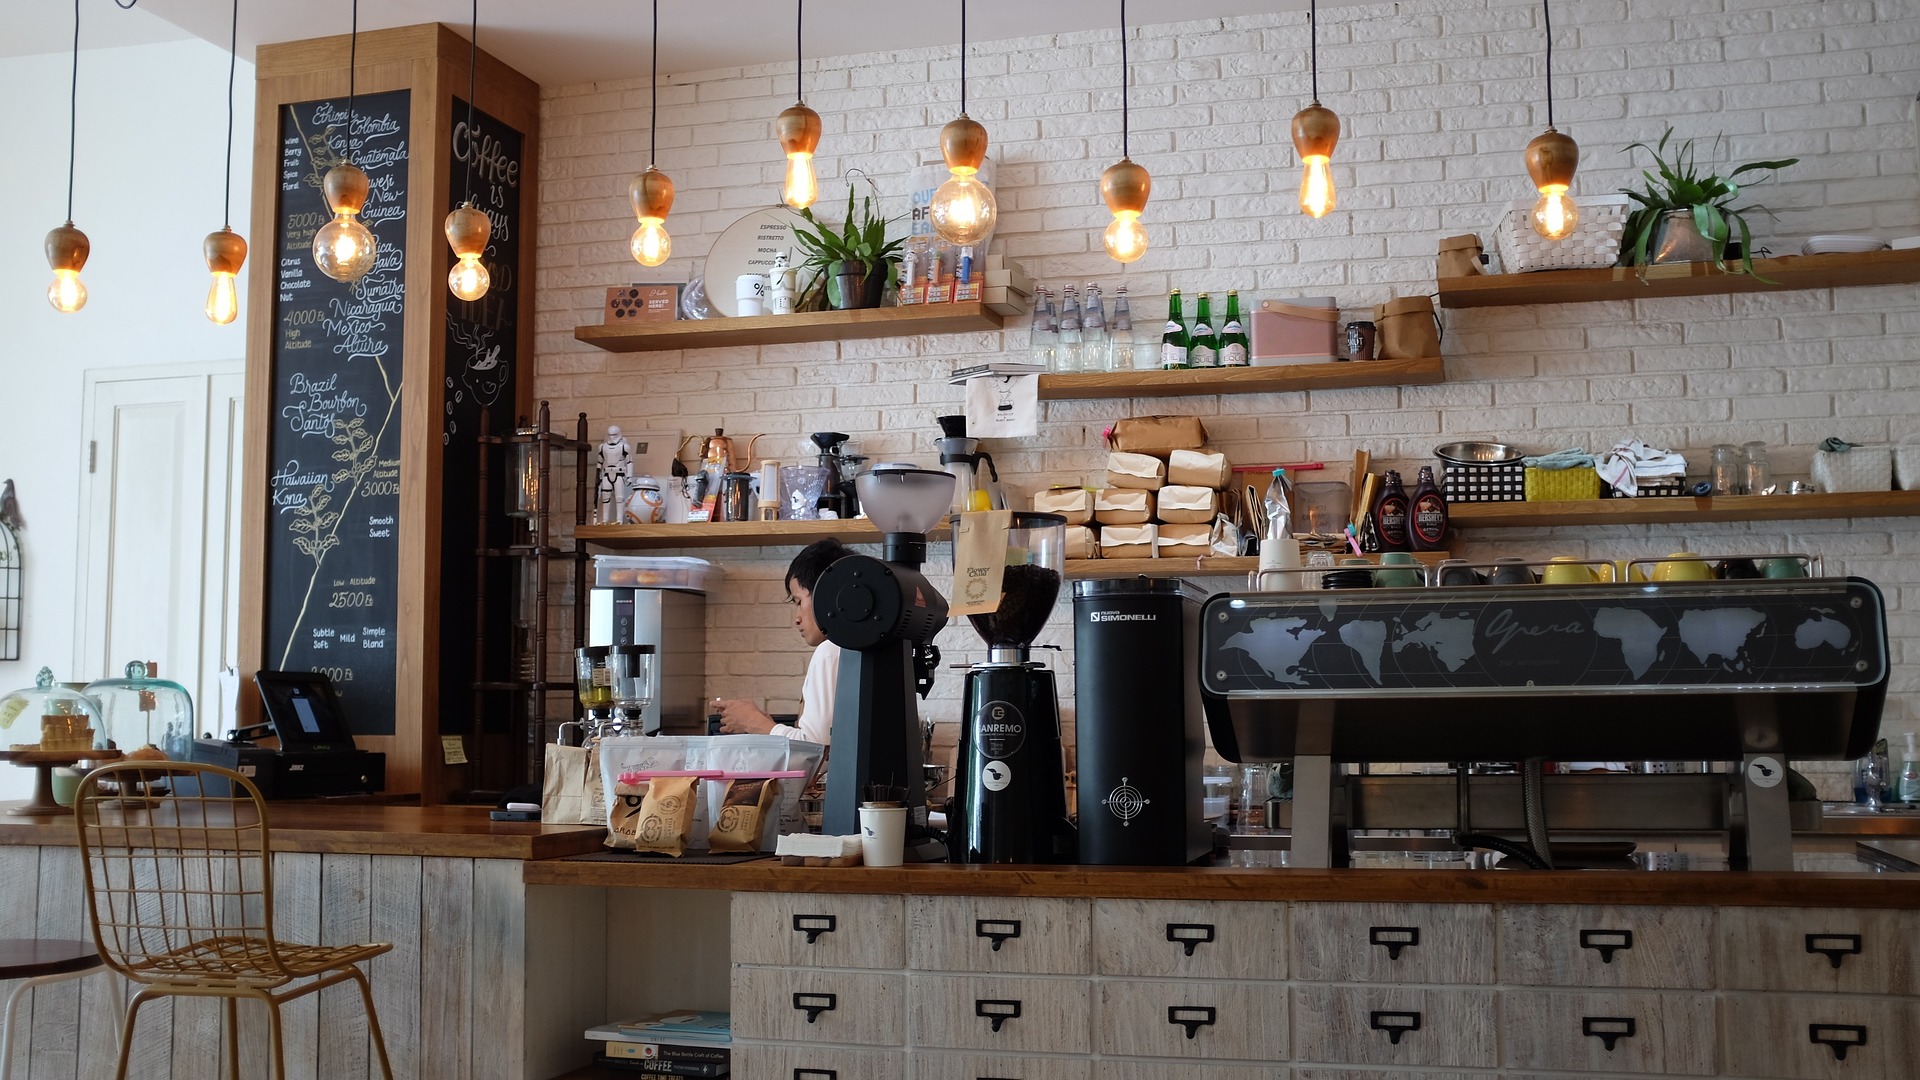 cutest coffee shops in la definitely reflect this cozy image of a welcoming cafe